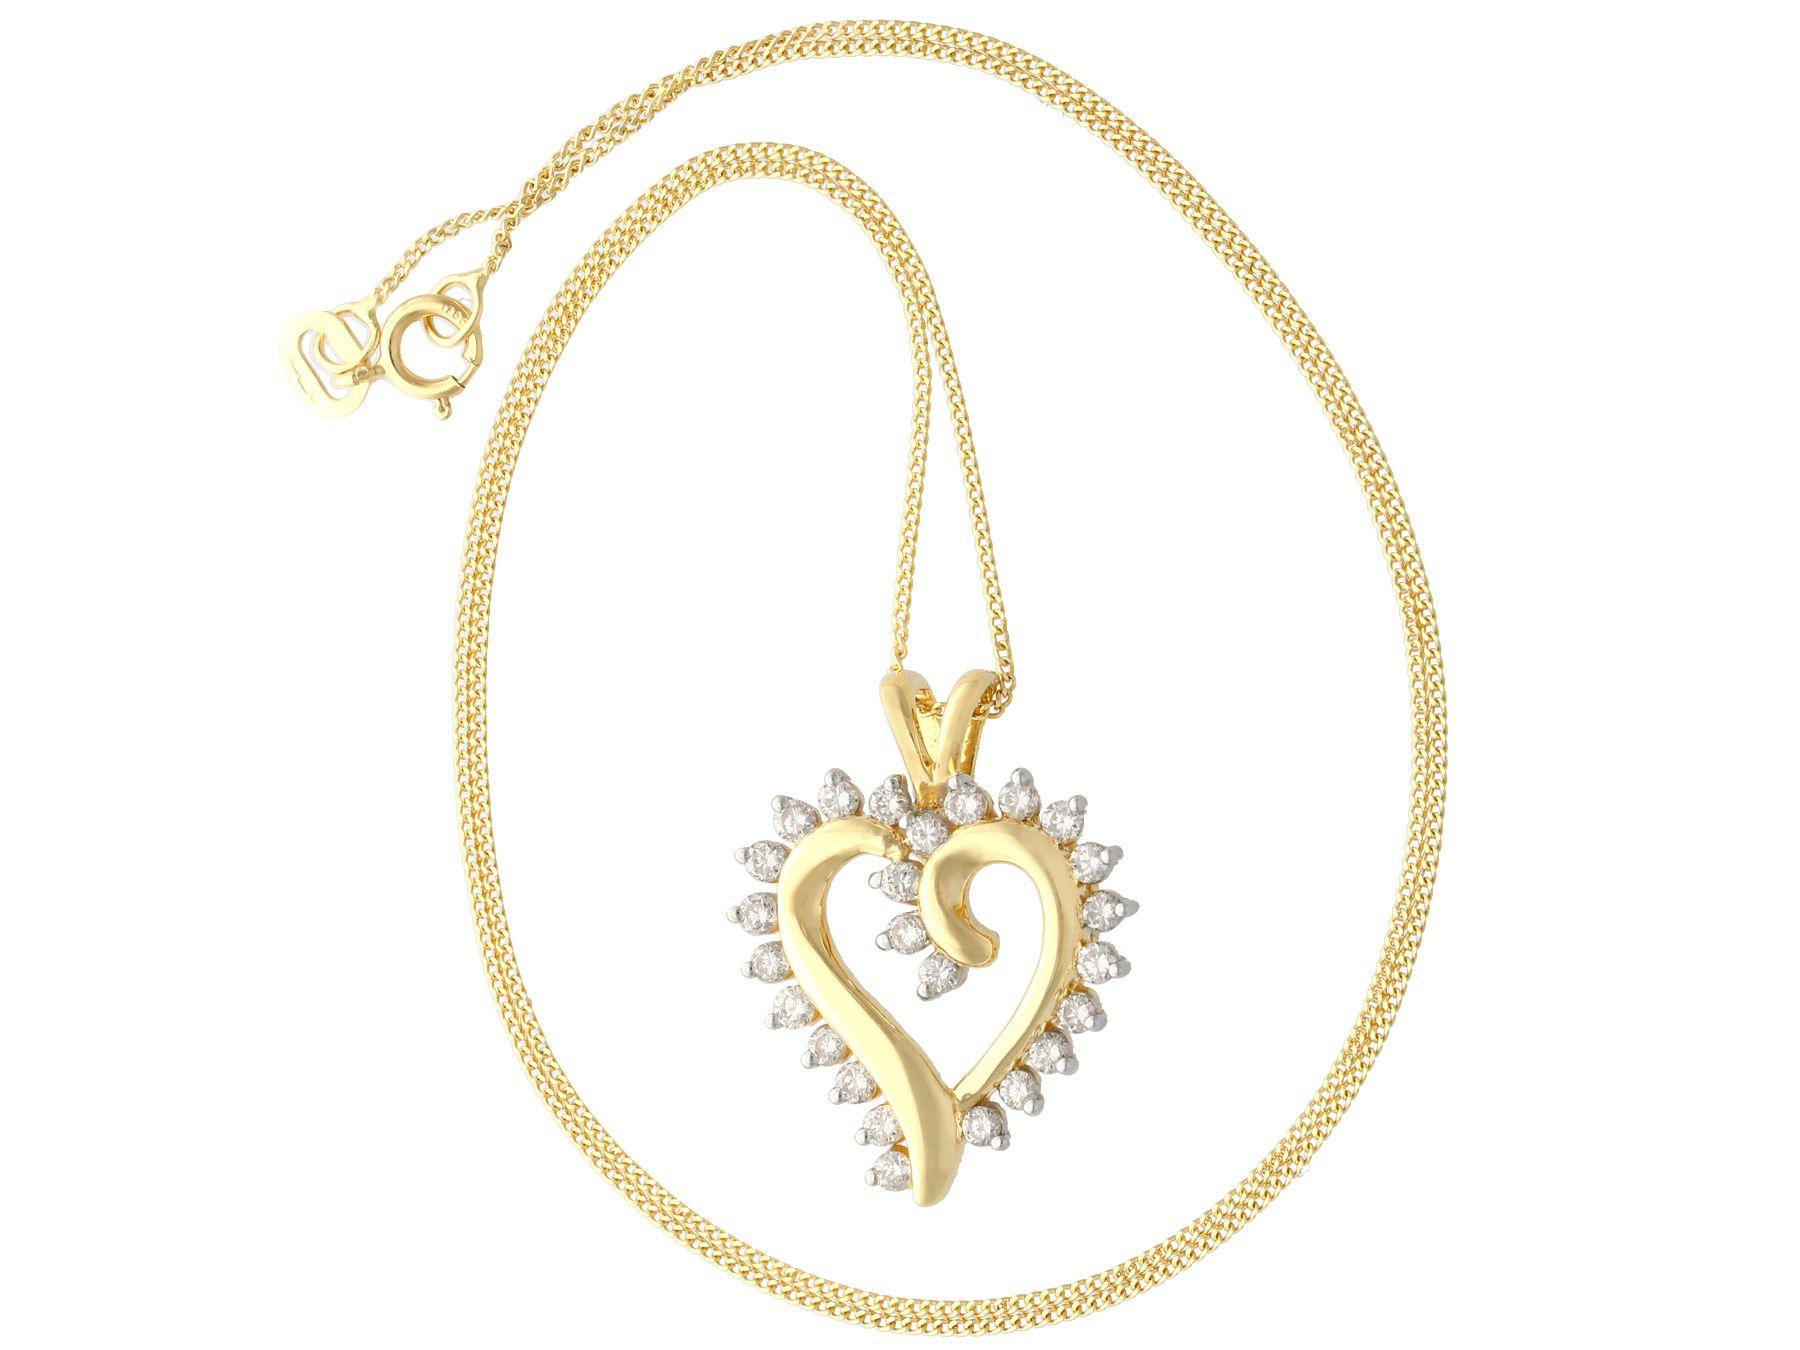 An impressive vintage 0.39Ct diamond and 18k yellow gold, 18k white gold set heart shaped pendant; part of our diverse antique jewelry and estate jewelry collections.

This fine and impressive diamond heart pendant has been crafted in 18k yellow